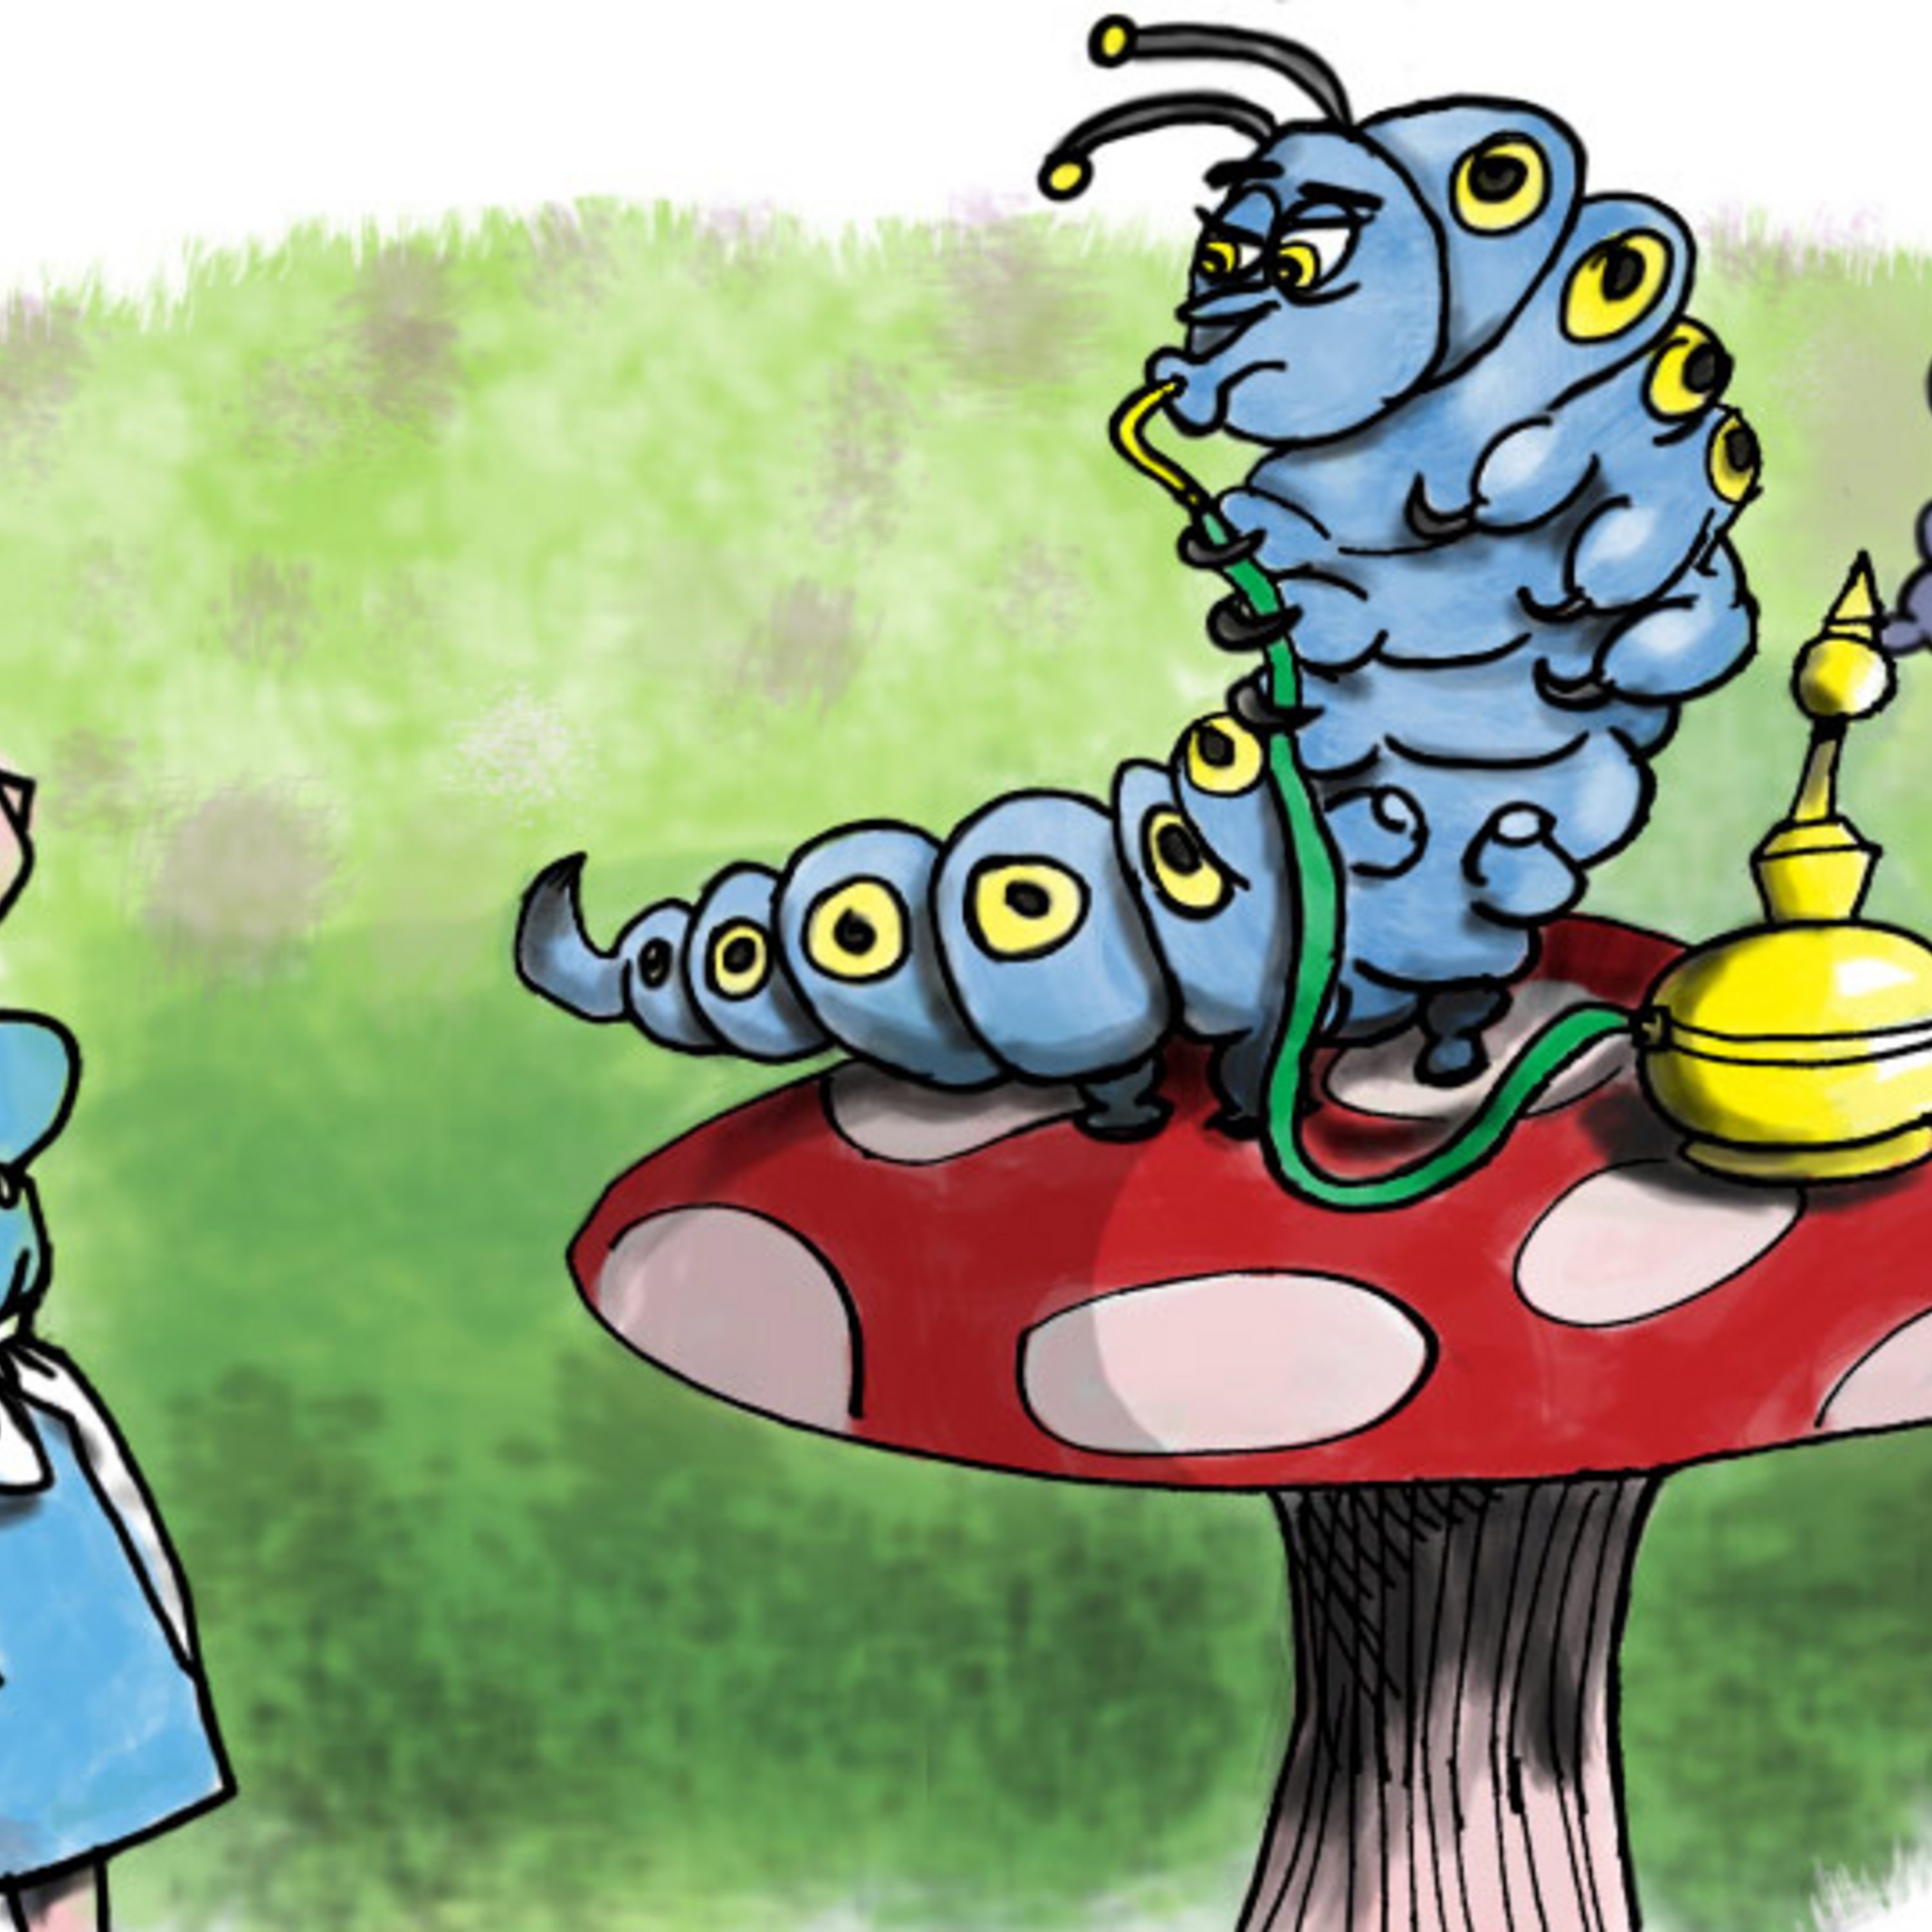 Alice in Wonderland: Part 5: Advice from a caterpillar